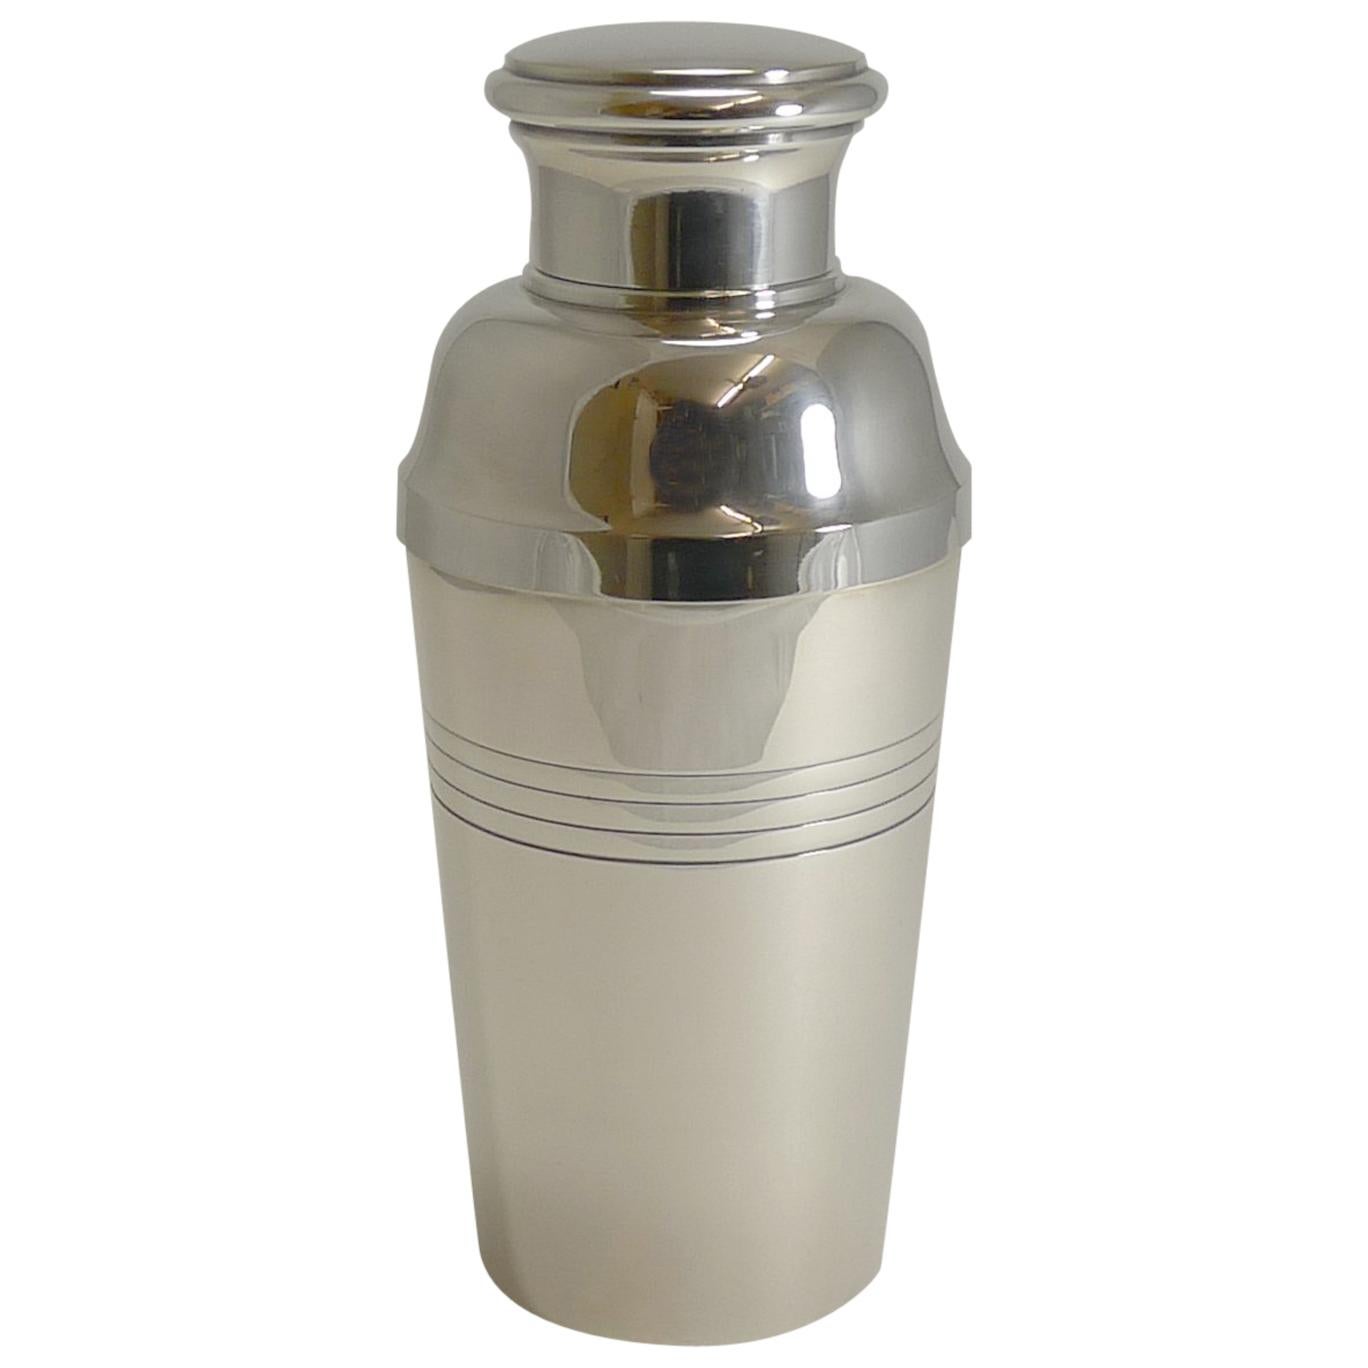 Large Art Deco Silver Plated Cocktail Shaker, French by Lancel Paris circa 1930s